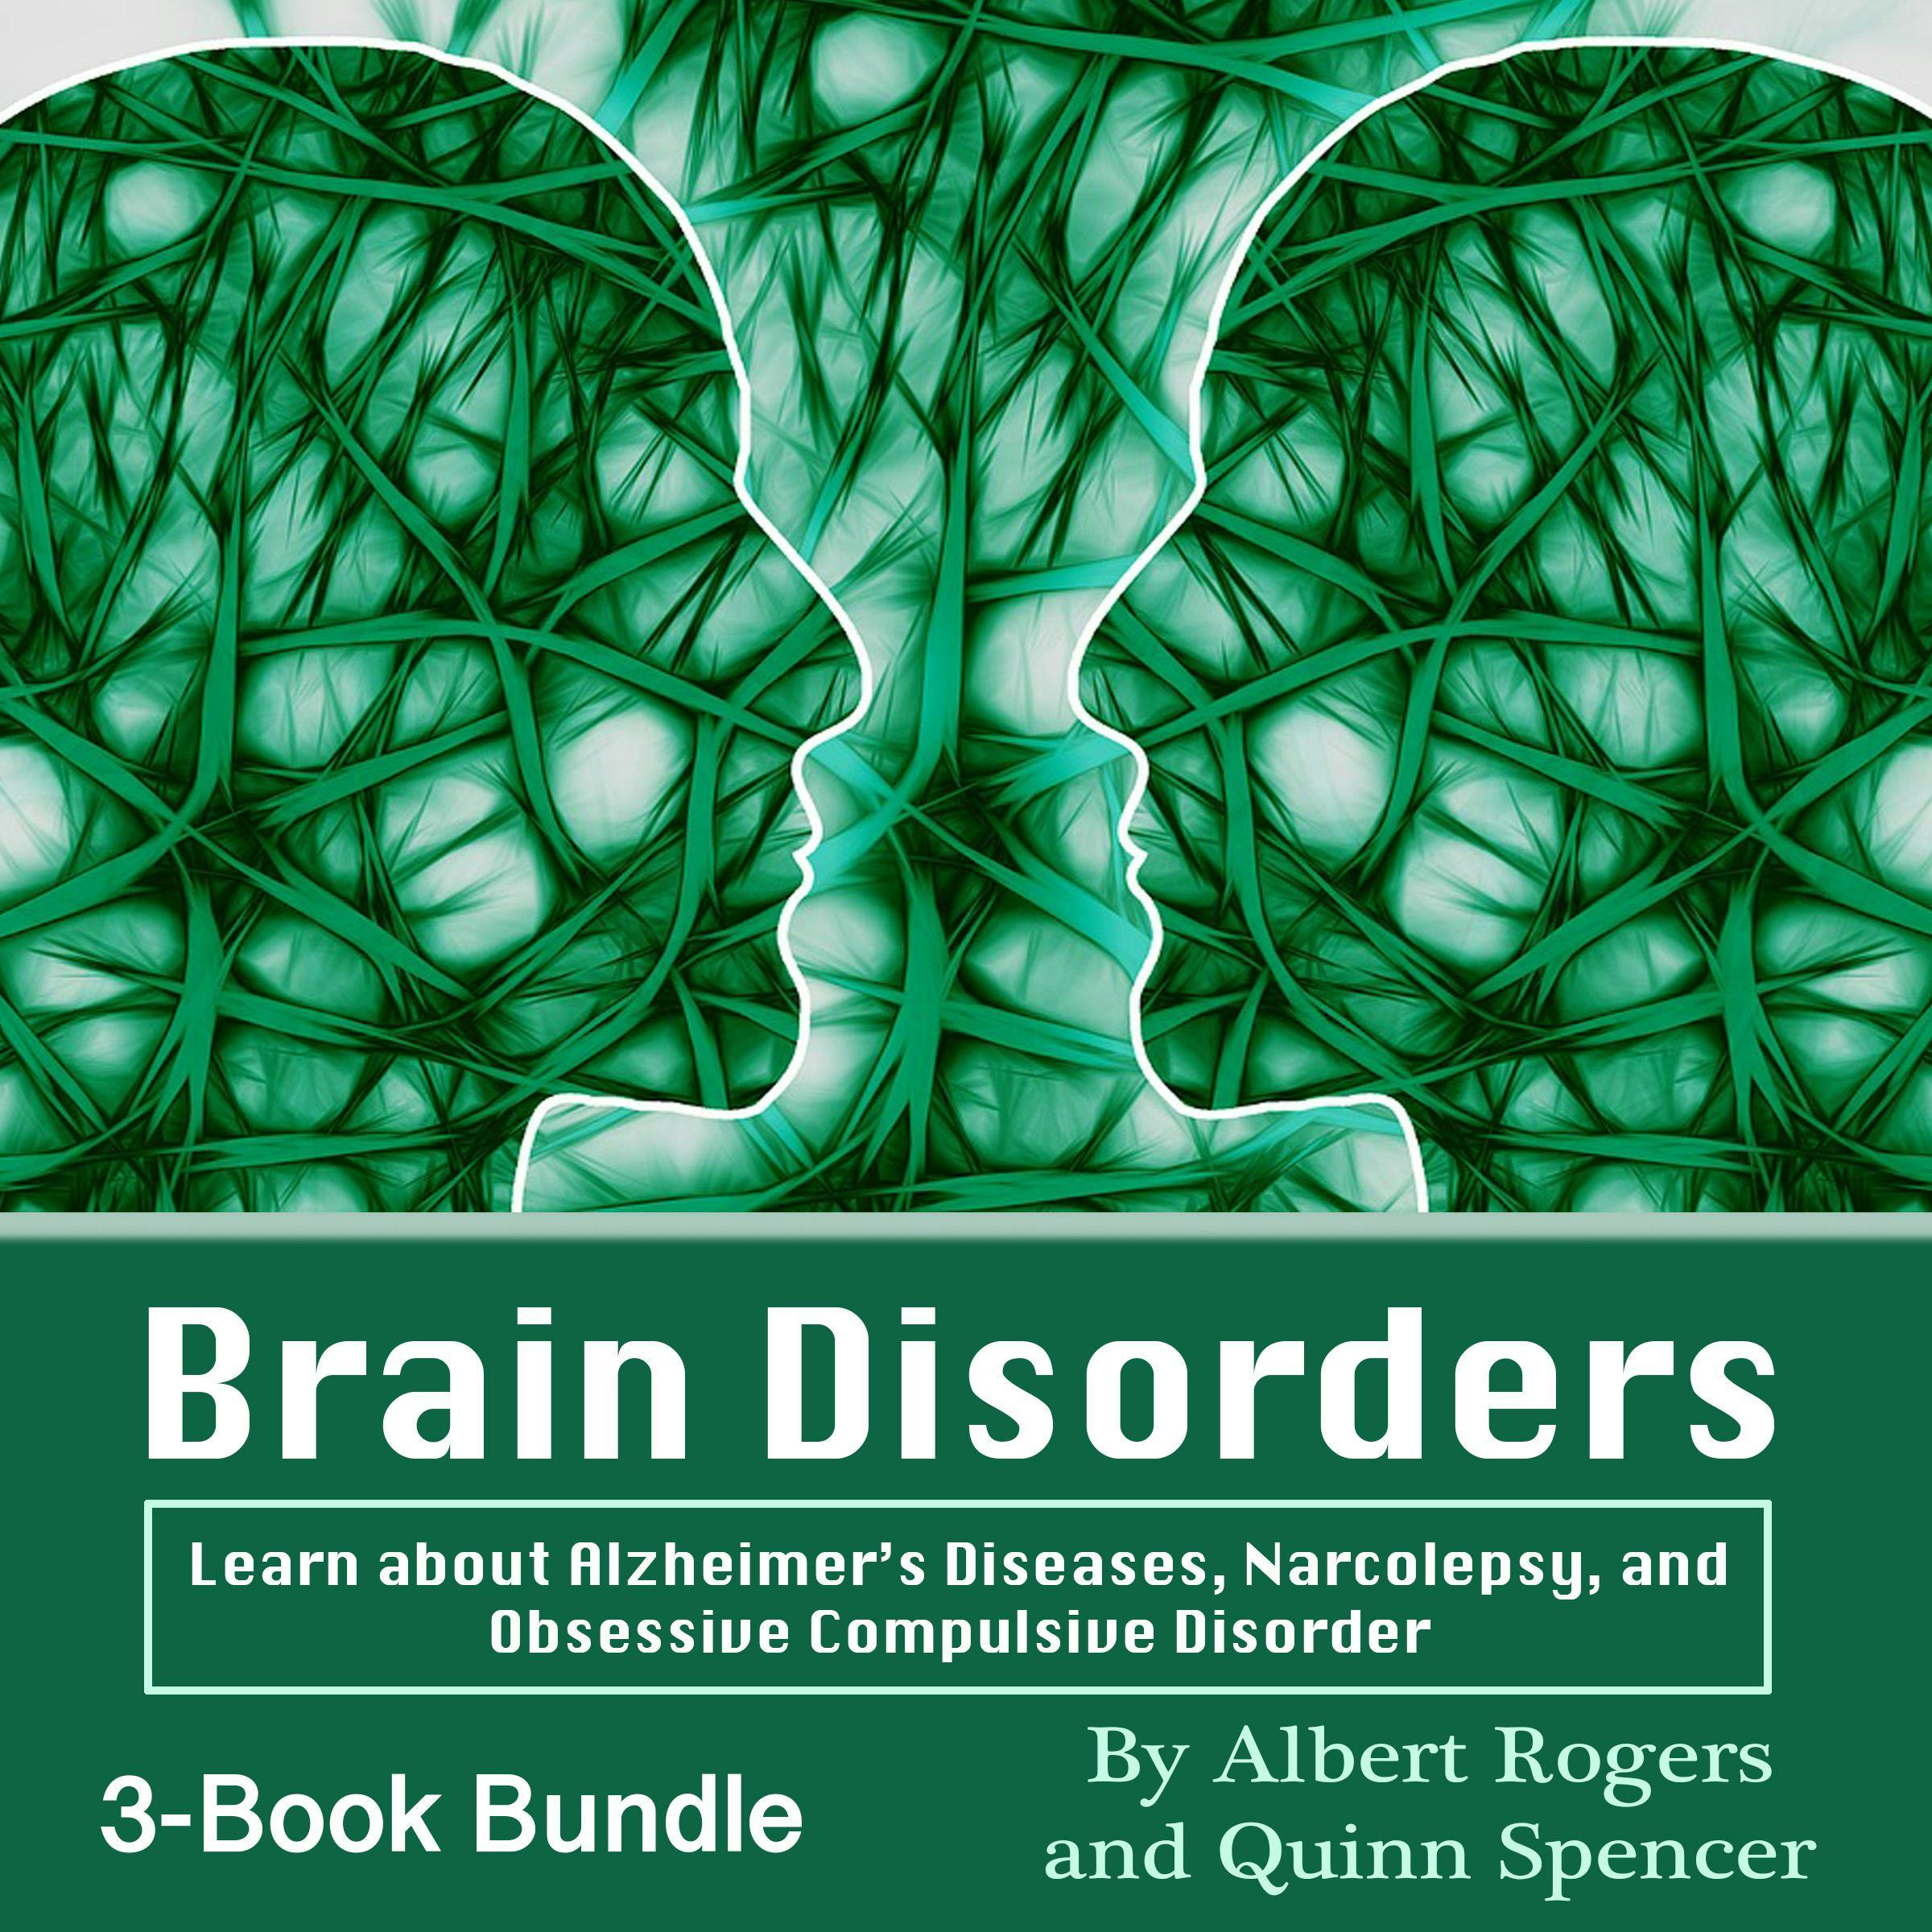 Brain Disorders: Learn about Alzheimer’s Diseases, Narcolepsy, and Obsessive Compulsive Disorder - Albert Rogers, Quinn Spencer